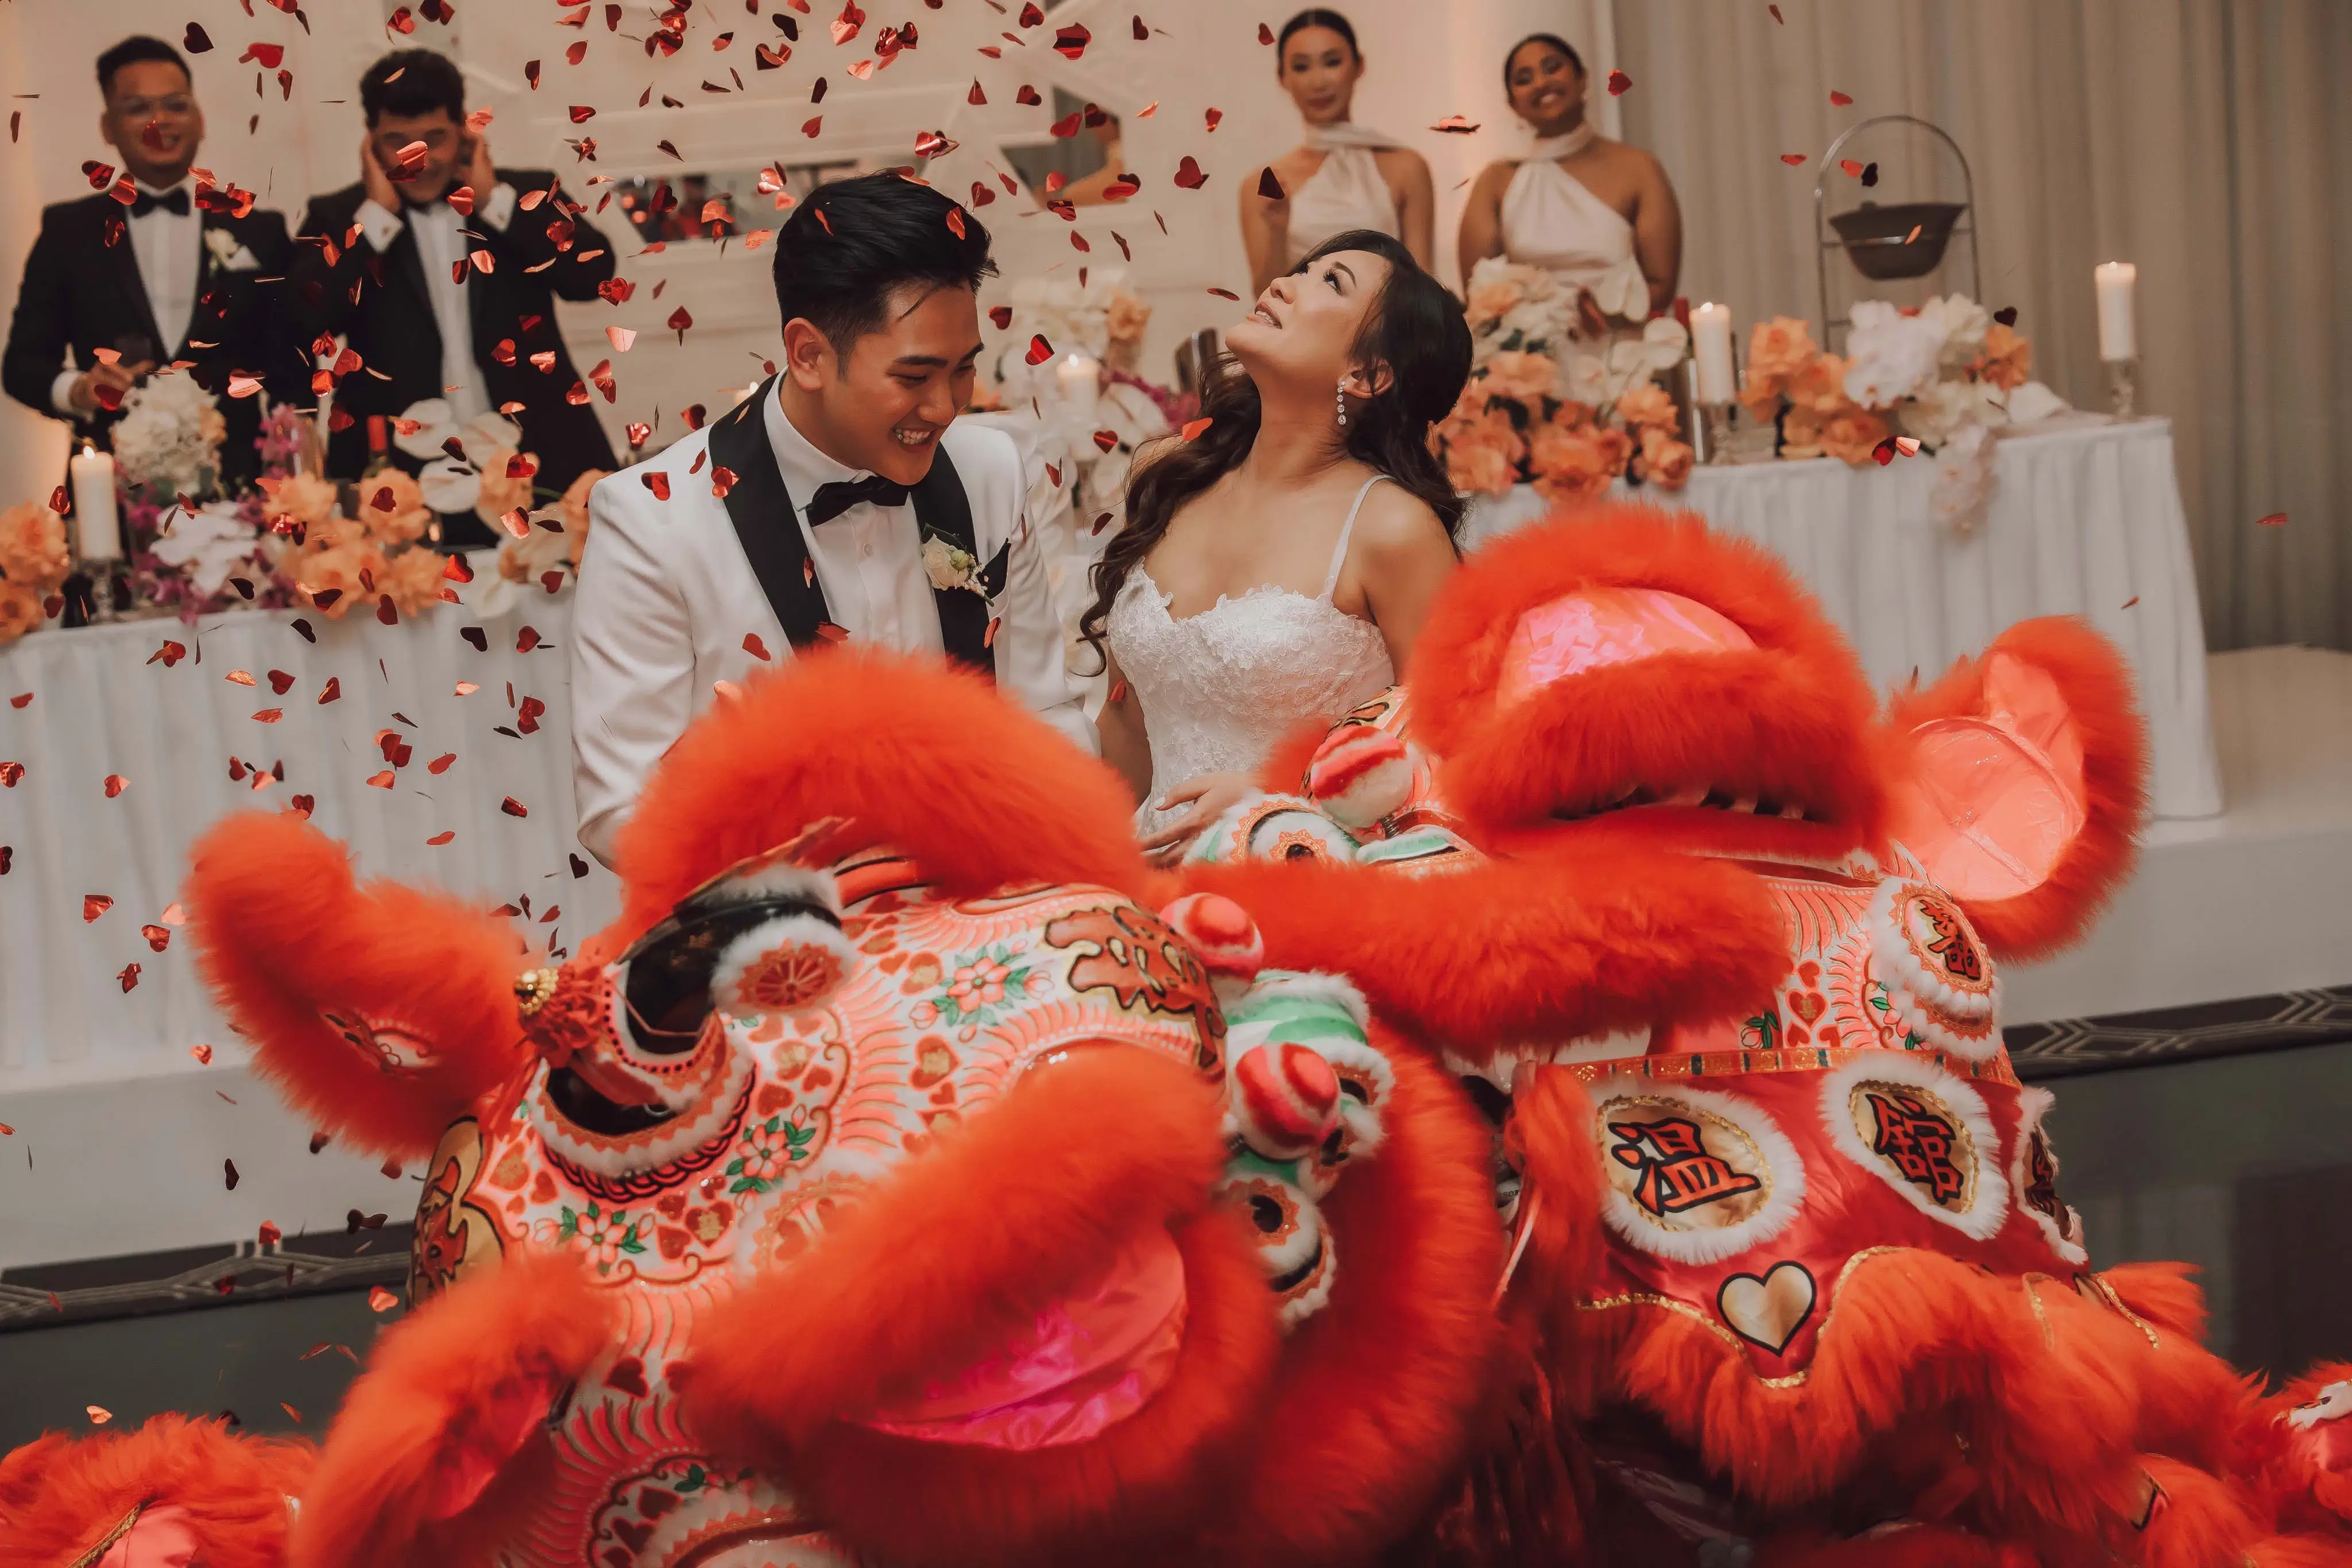 Wedding photography melbourne.A radiant bride and groom in Melbourne enjoying a Chinese lion dance at their wedding, symbolizing luck and happiness.